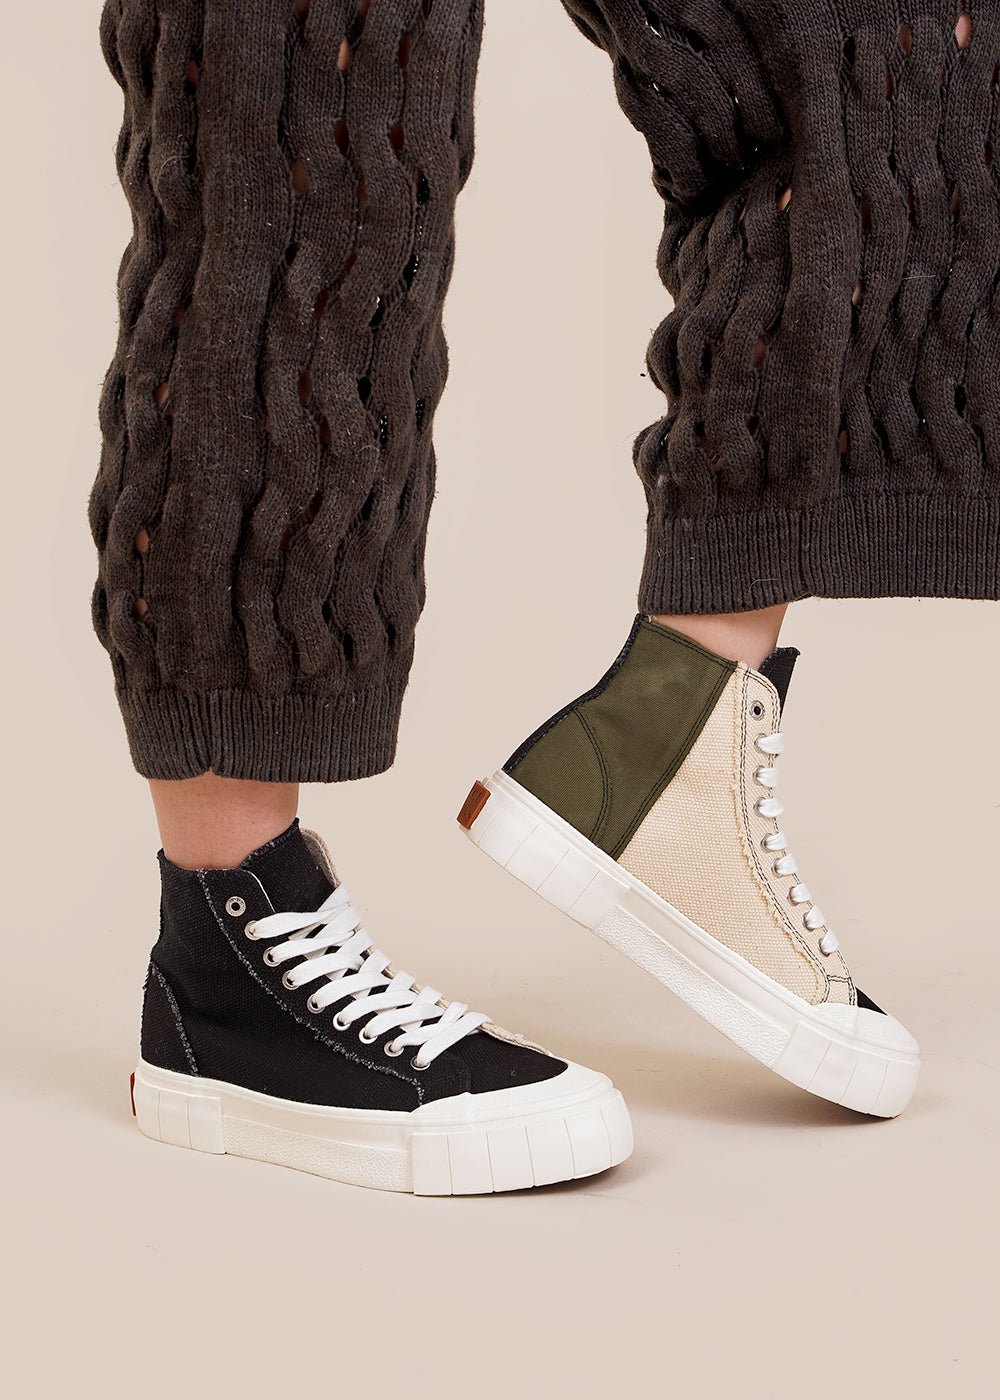 GOOD NEWS Palm Seasonal Sneakers - New Classics Studios Sustainable Ethical Fashion Canada